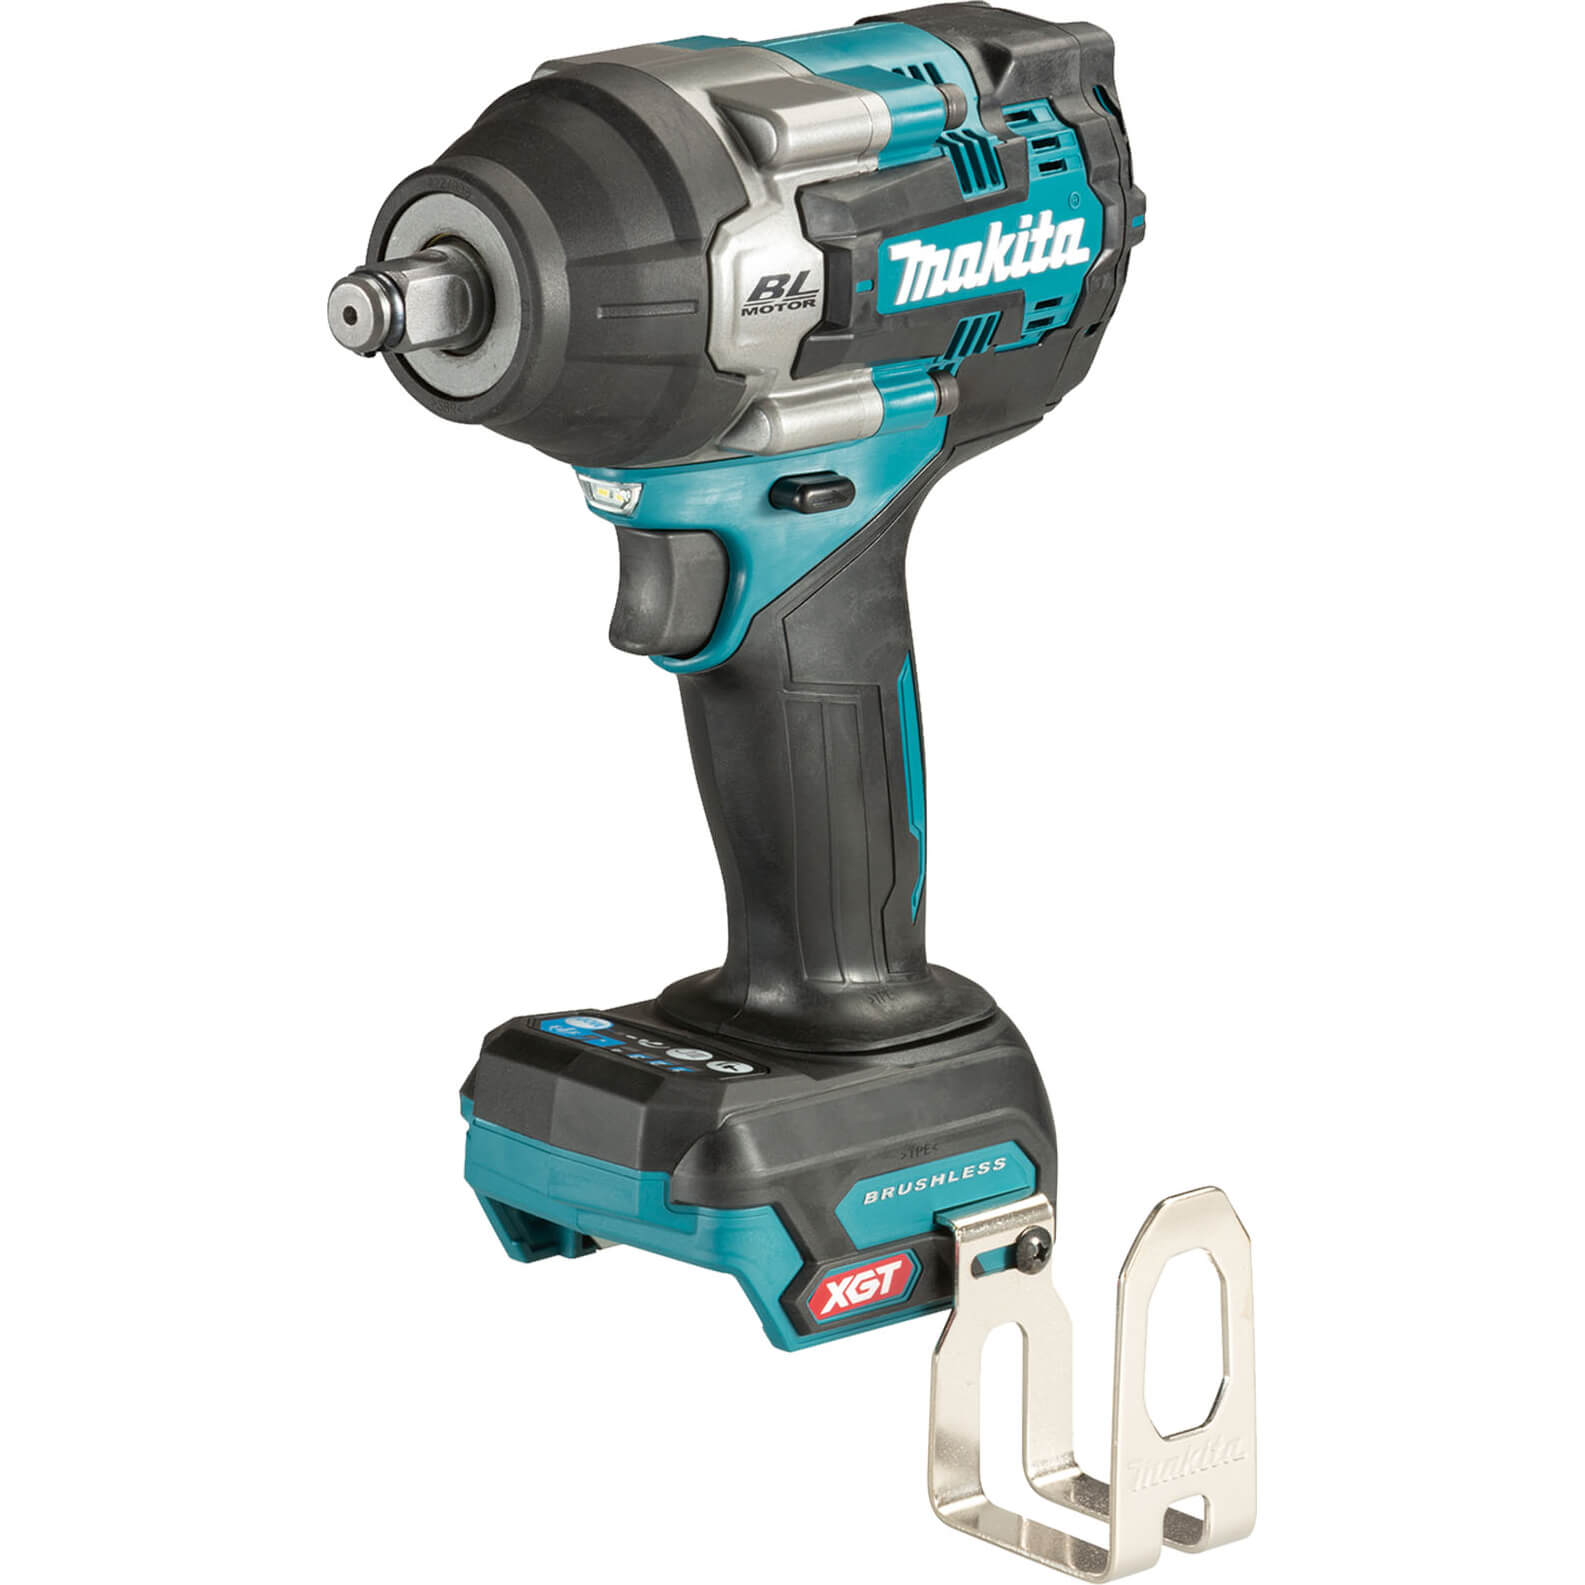 Photo of Makita Tw007g 40v Max Xgt Cordless Brushless Impact Wrench No Batteries No Charger No Case